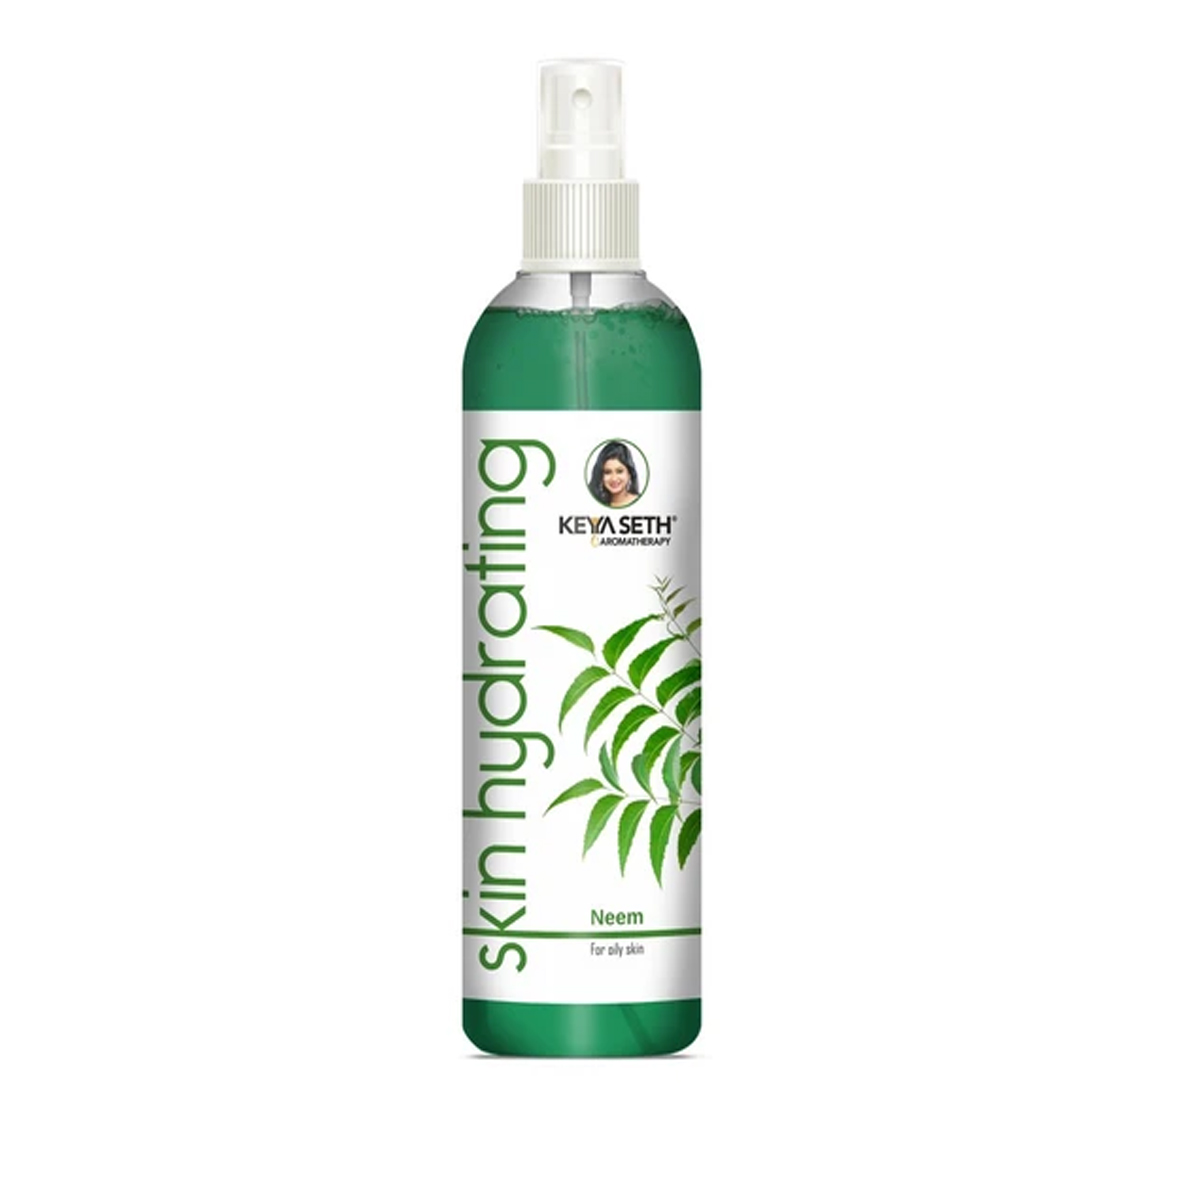 Bengal Shopping - One Life to Live - One Store to Shop | Keya Seth Skin  Hydrating Neem Water For Oily Skin 200 ML